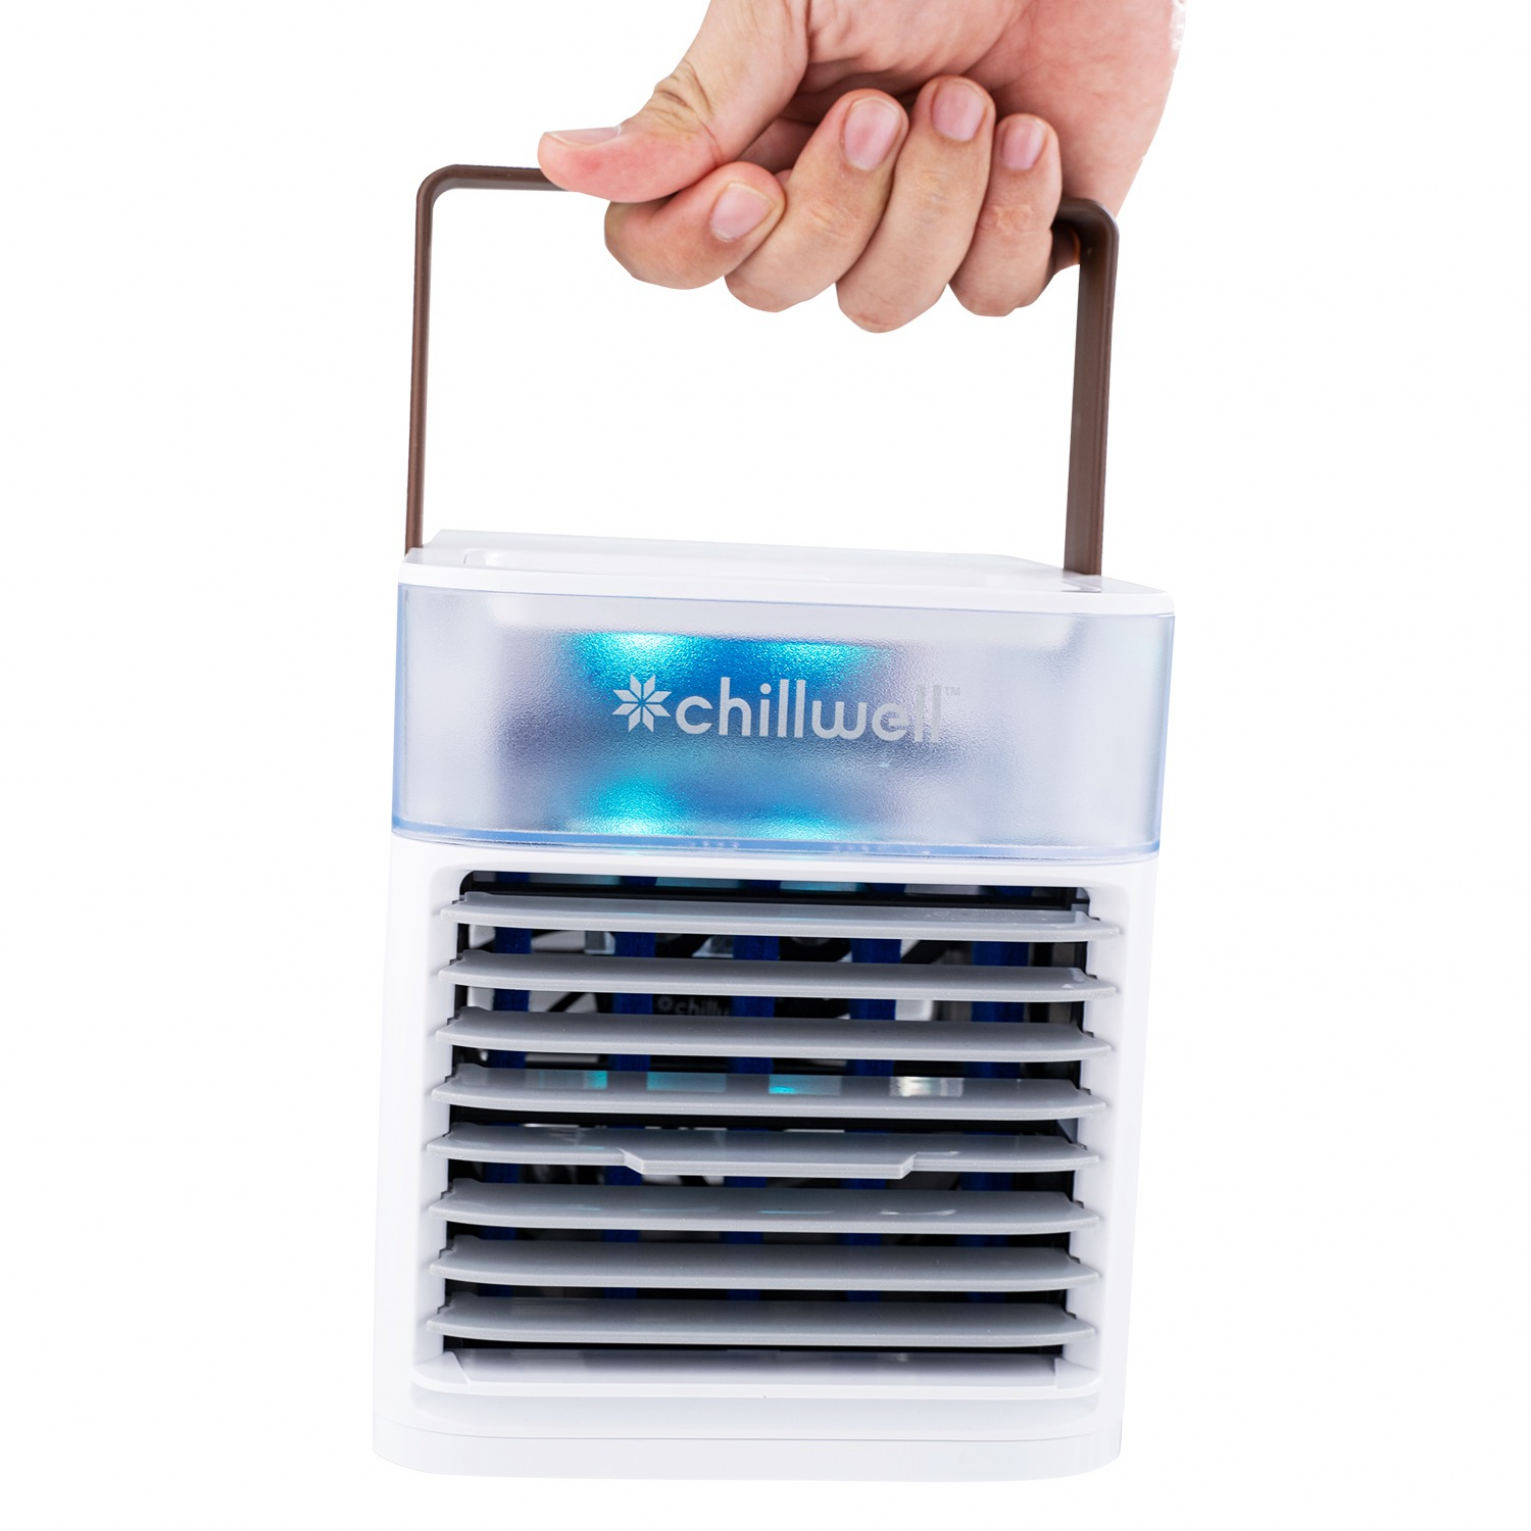 Chillwell Ac Portable Ac Review